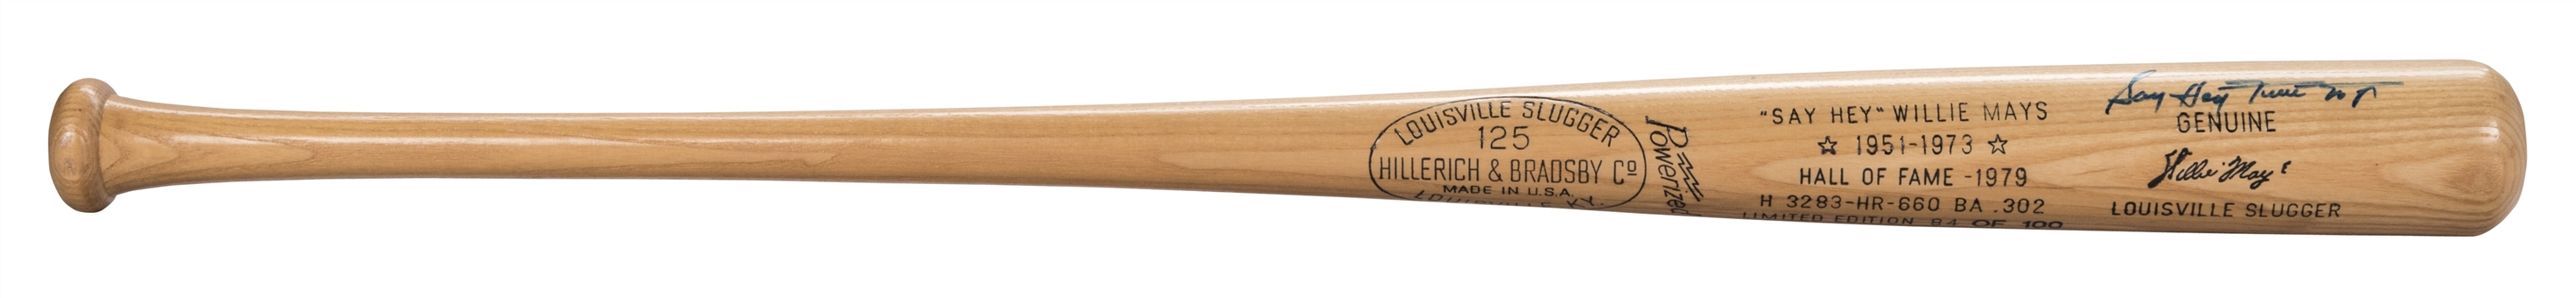 Willie Mays Autographed and Inscribed "Say Hey" Commemorative Stat Bat LE 84/100 (JSA)